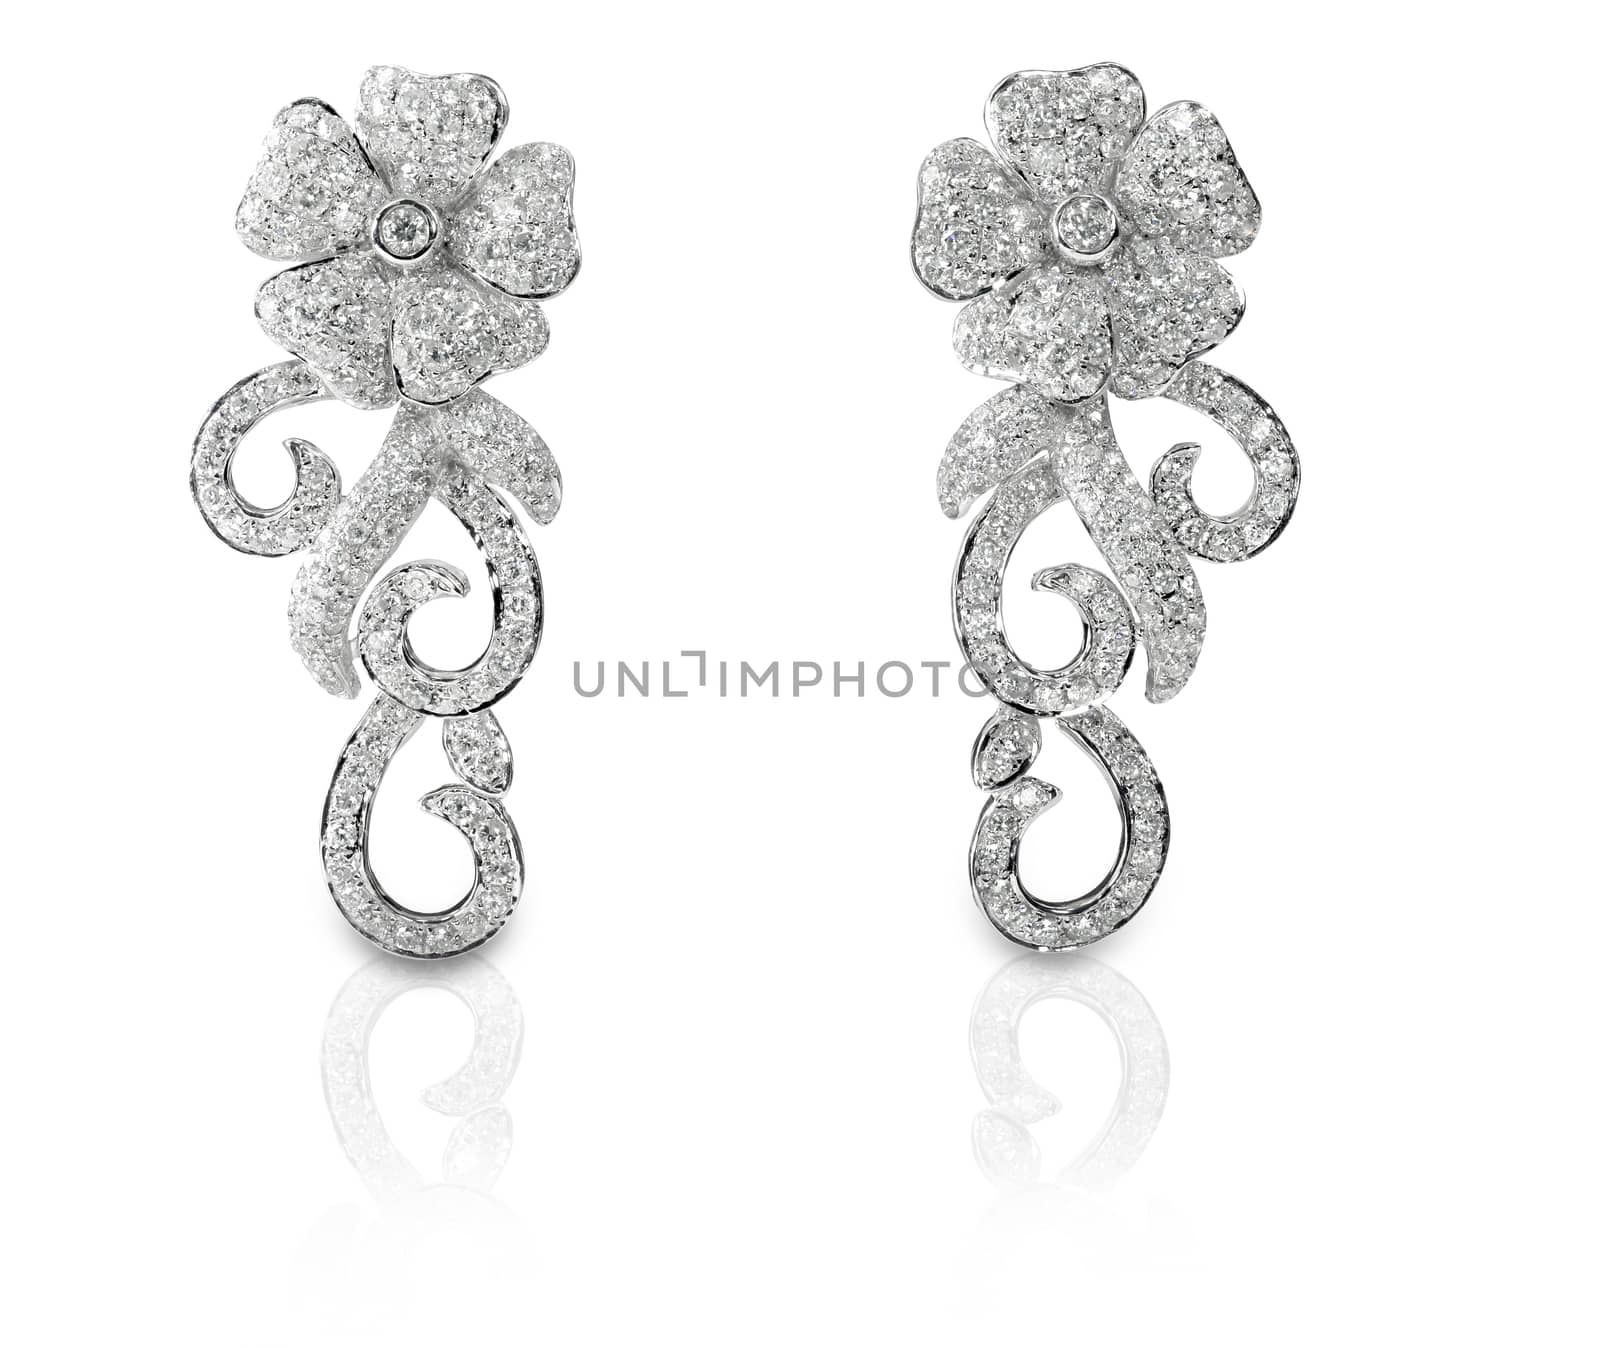 Floral Shaped Pave Diamond Earrings by fruitcocktail